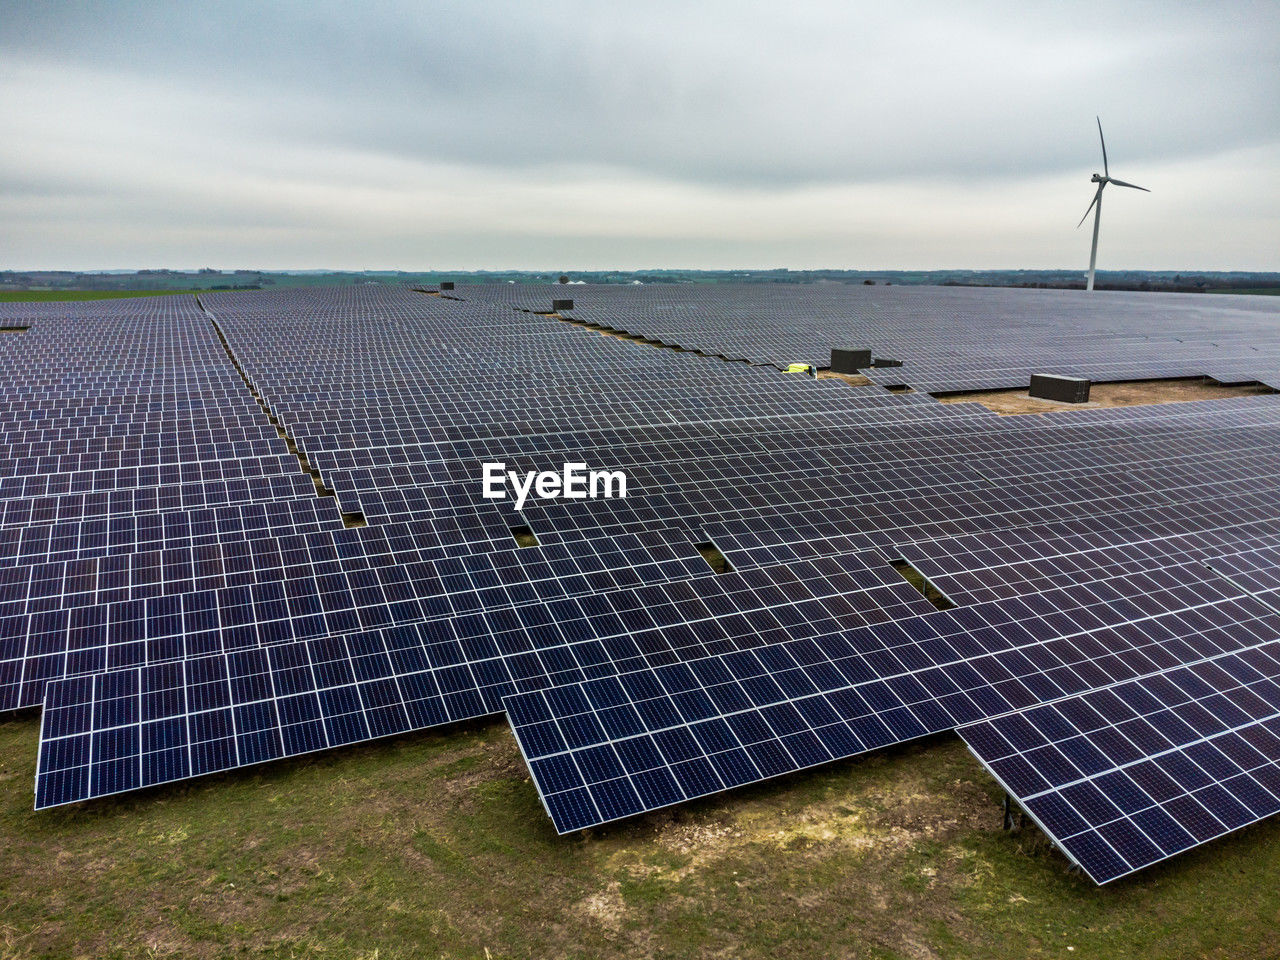 88 mw solar park at stouby, north of randers by european energy, denmark